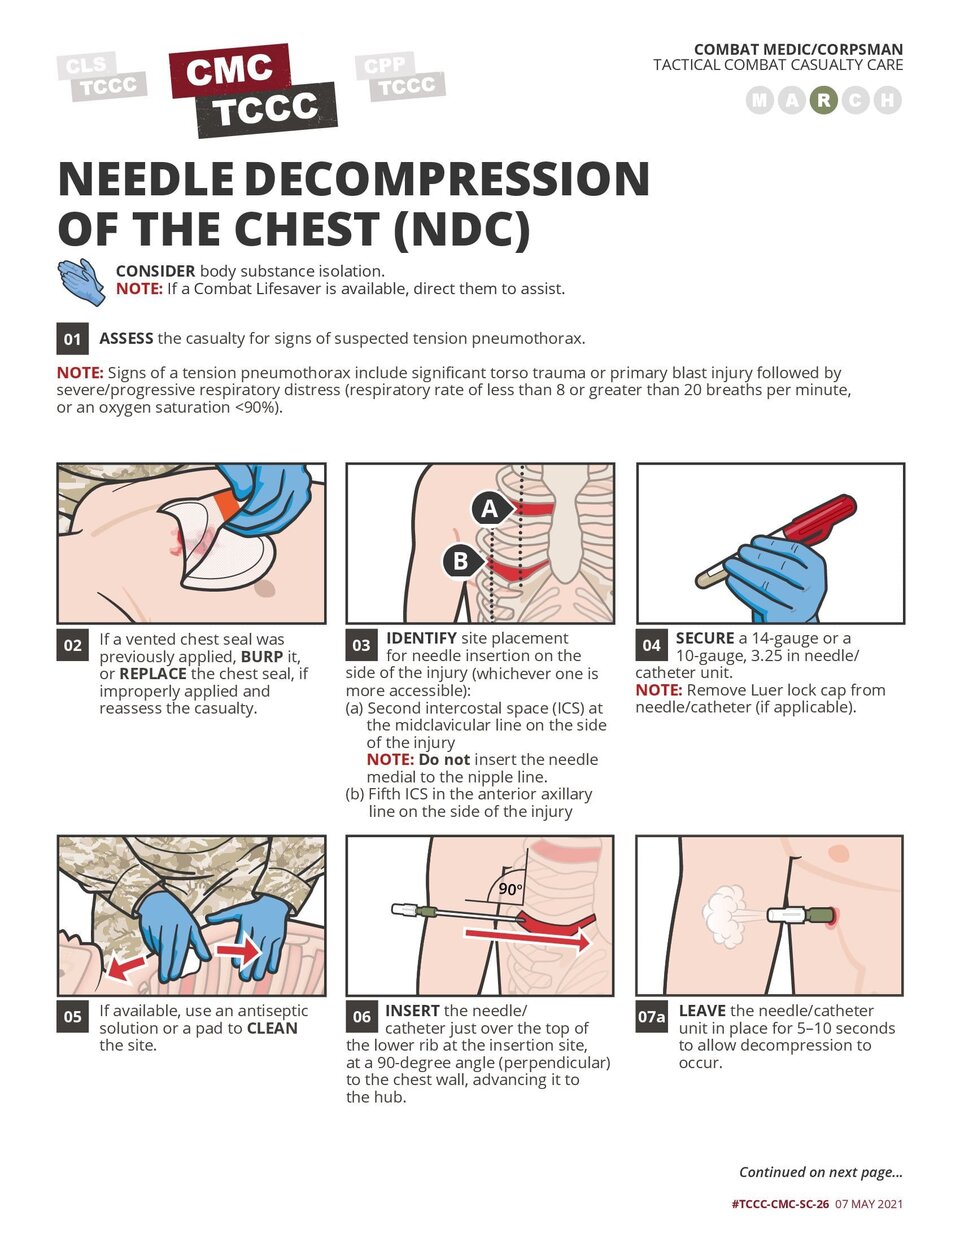 Needle Decompression of the Chest (NDC)